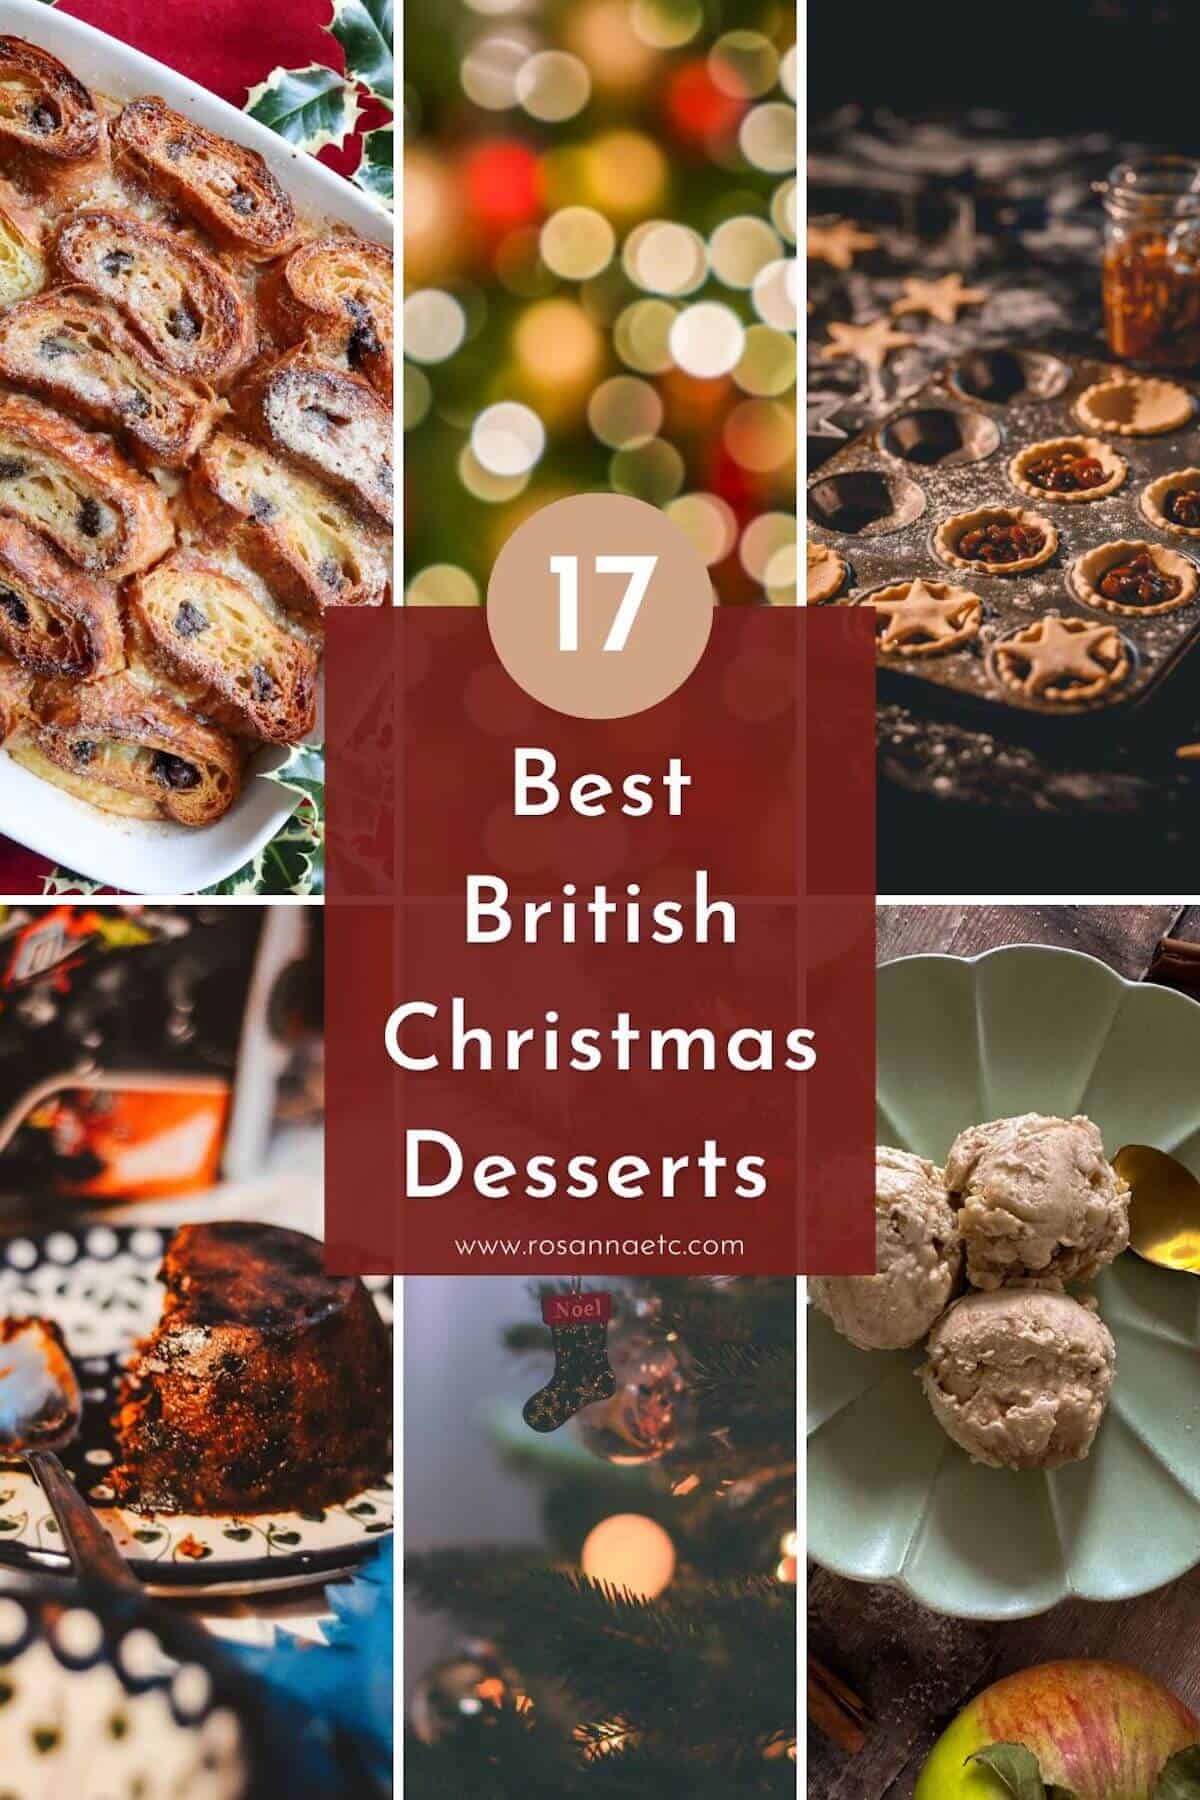 Collage of British Christmas desserts including mince pies, Christmas pudding and ice cream.